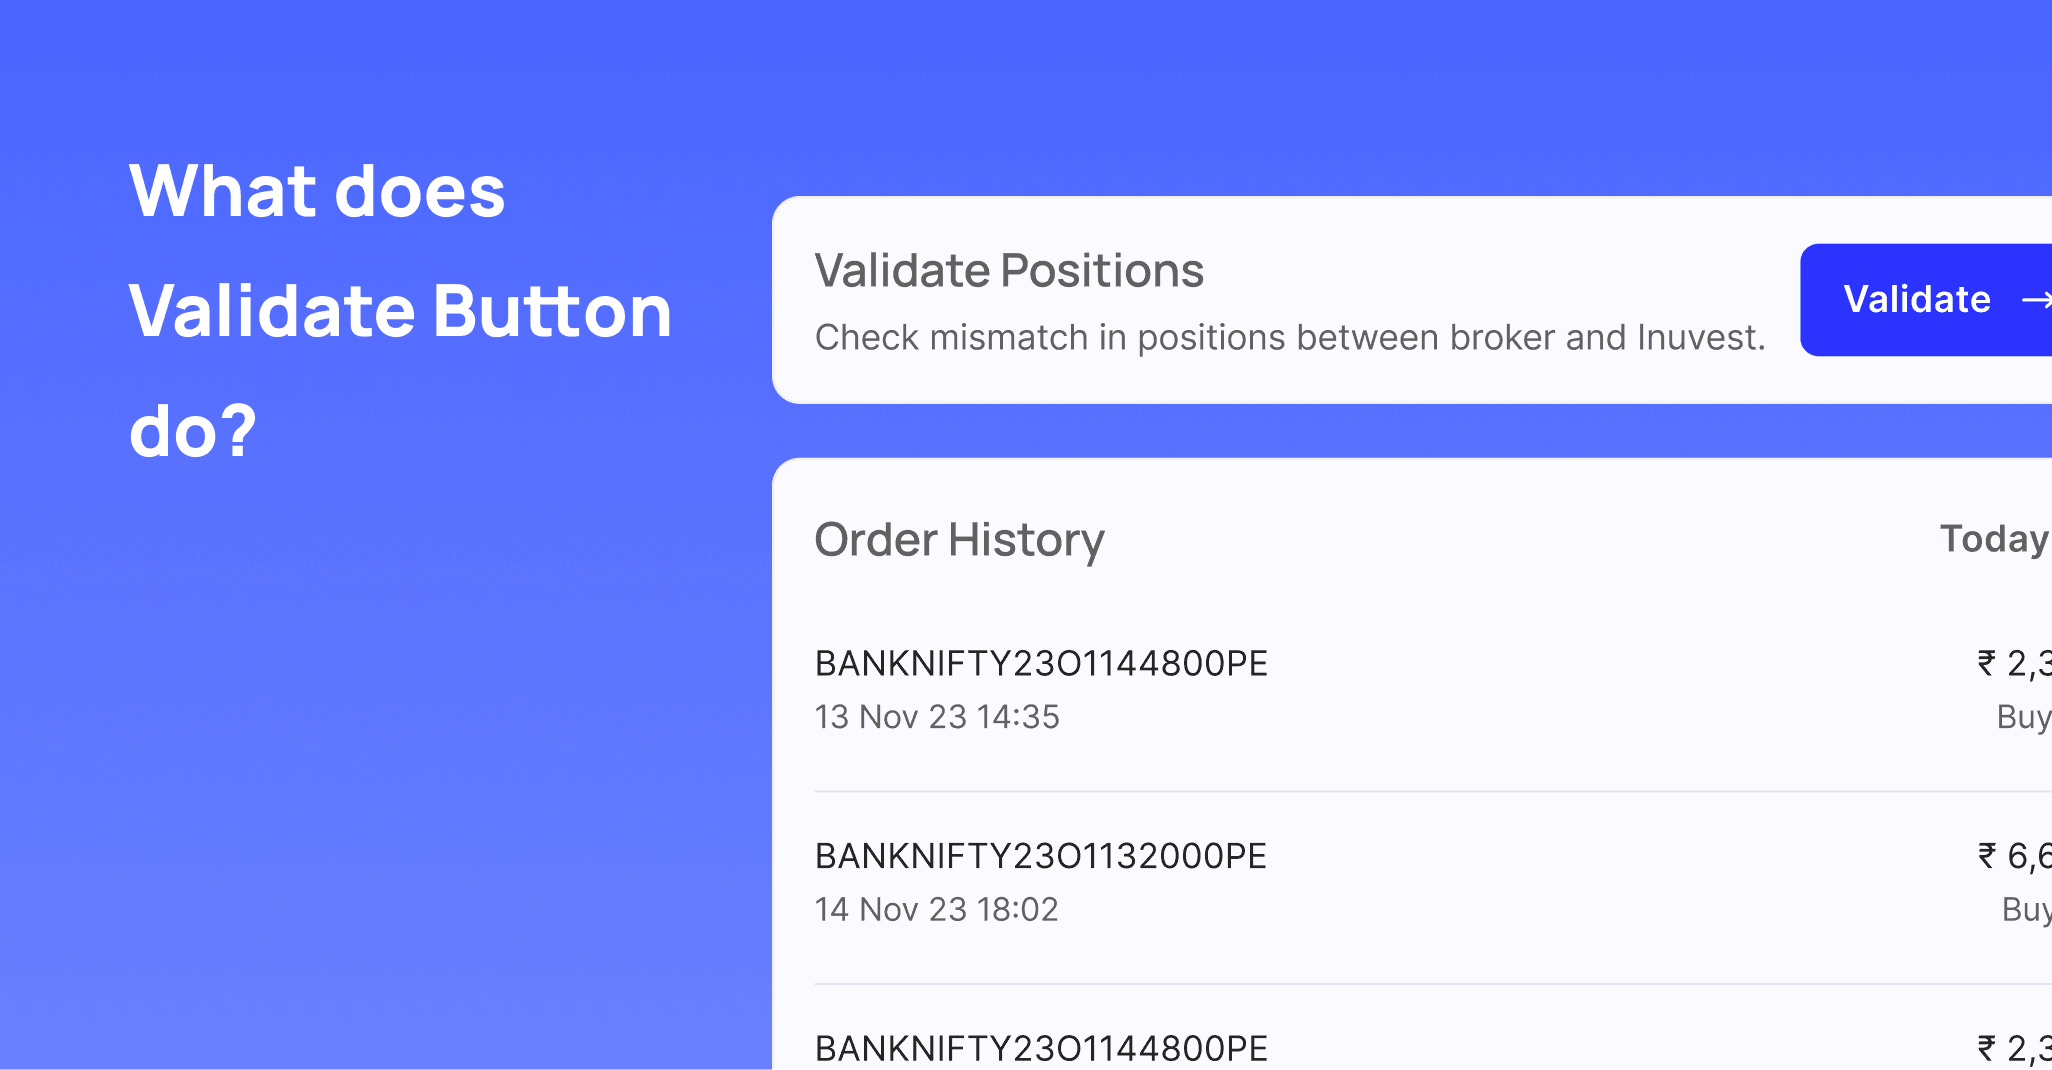 What does Validate button do?